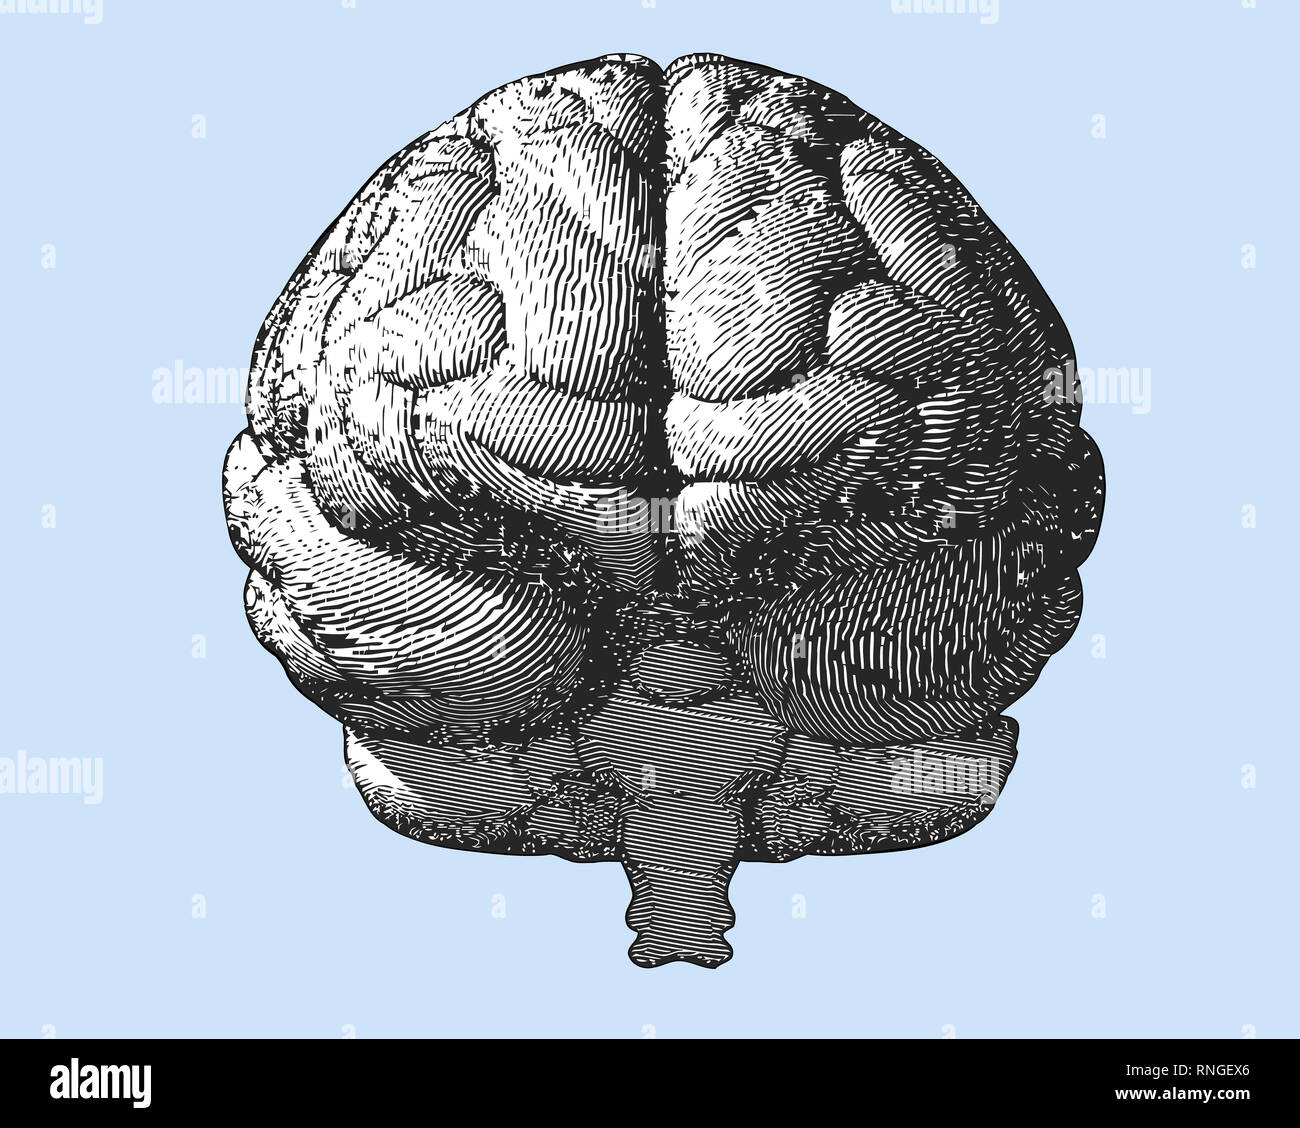 Black and white engraving brain illustration in front view on light blue background Stock Photo